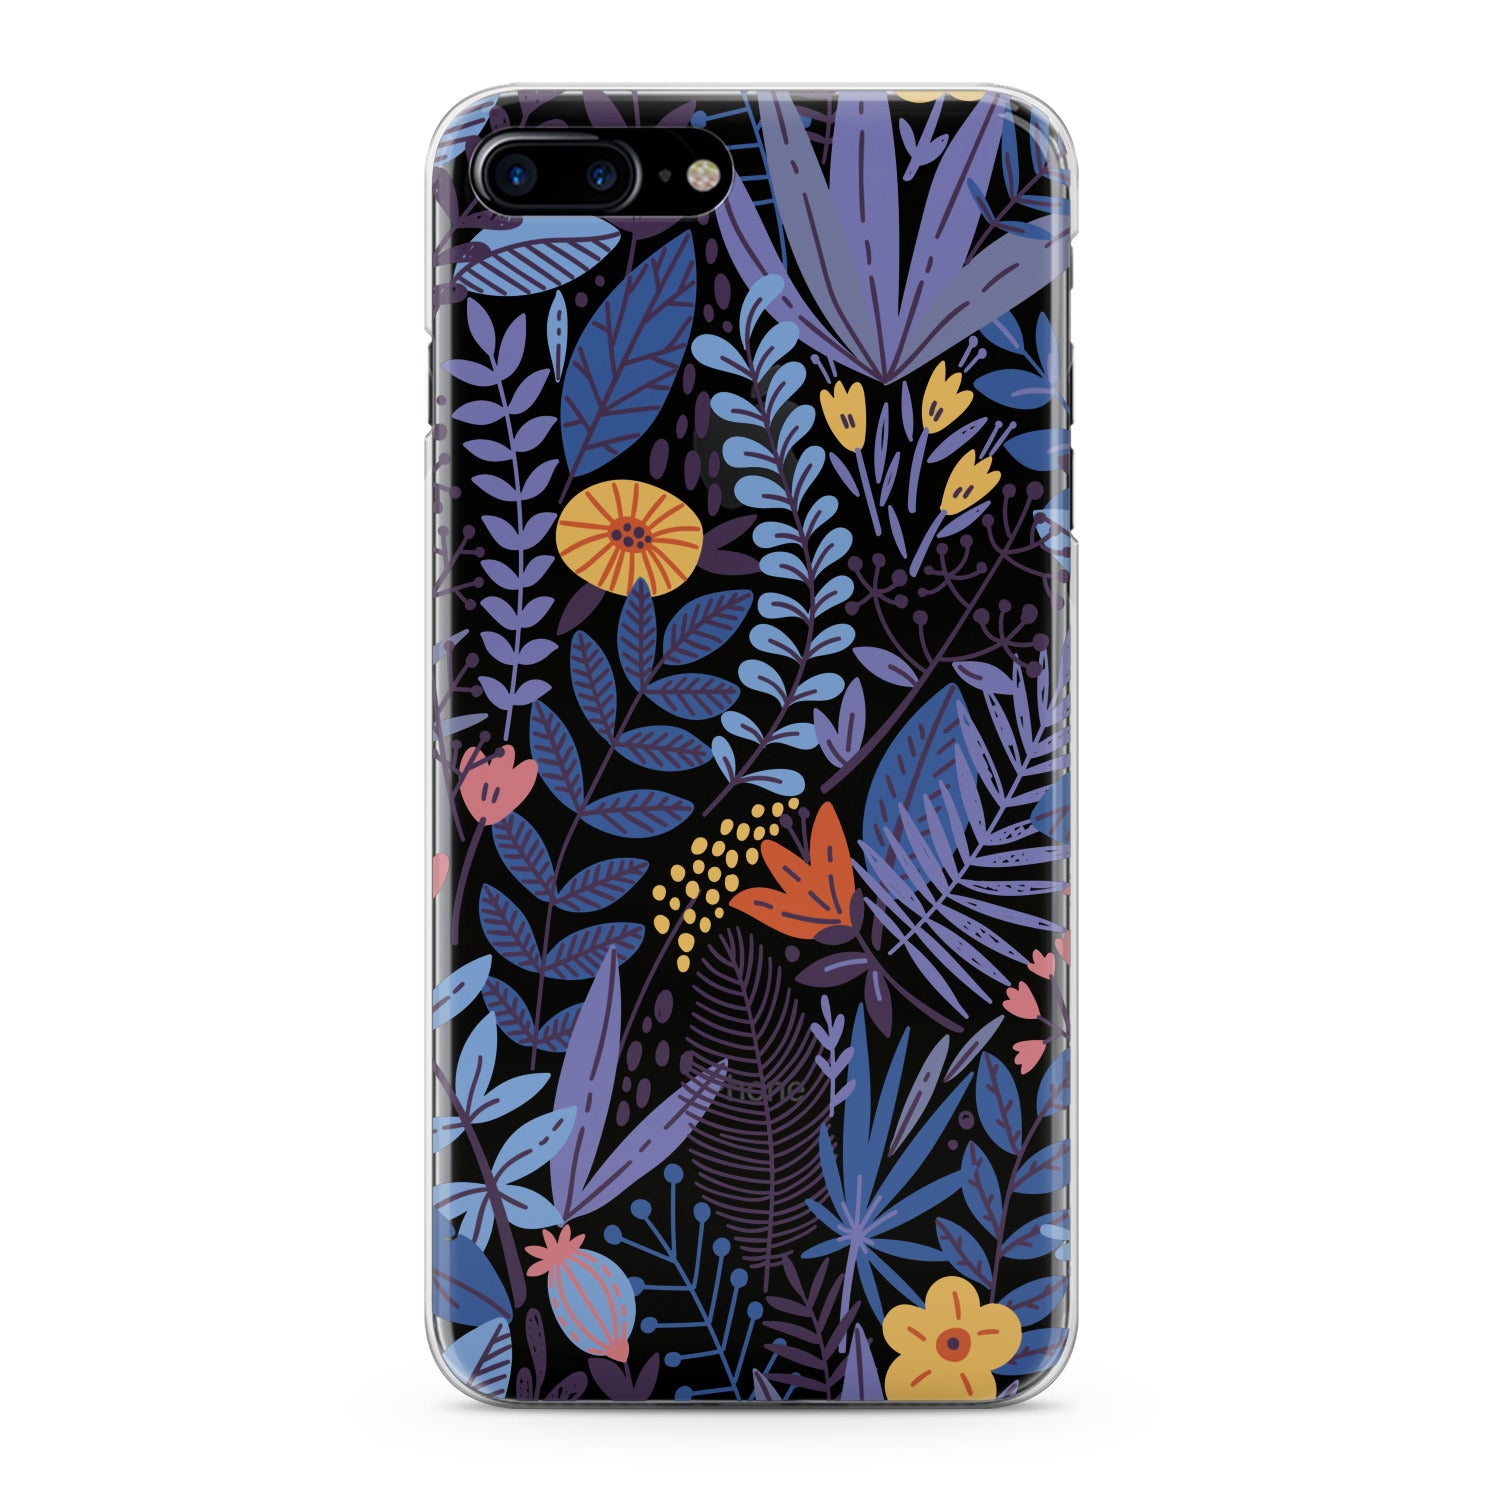 Lex Altern Blue Wildflower Phone Case for your iPhone & Android phone.